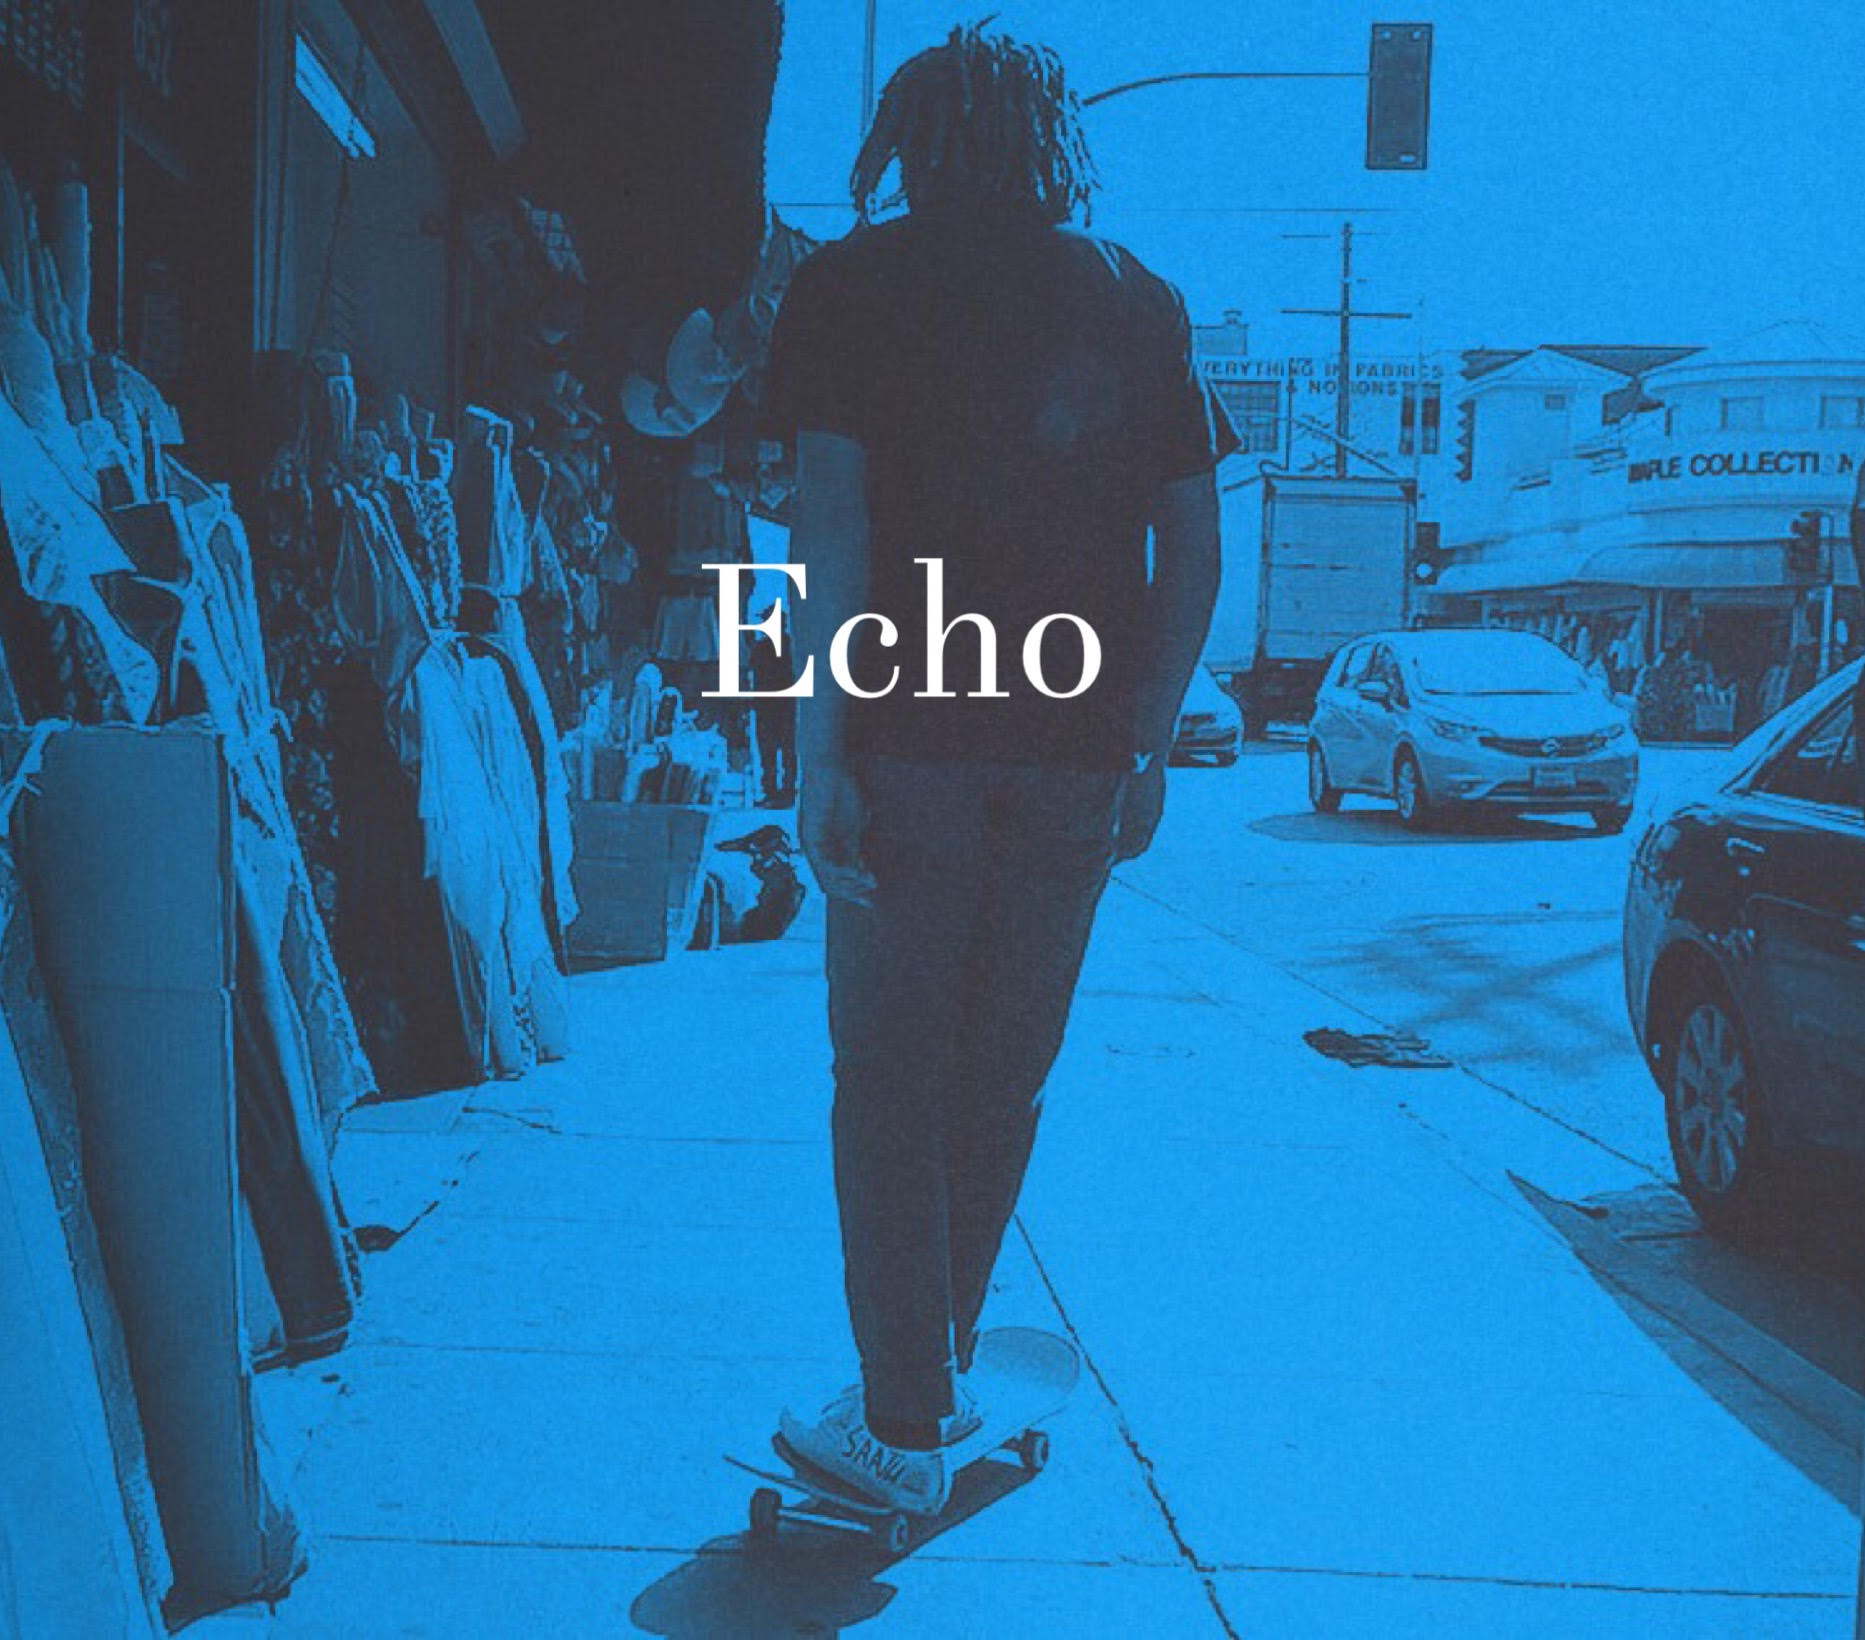 Echo music video produced by Monti and Josh Stevens